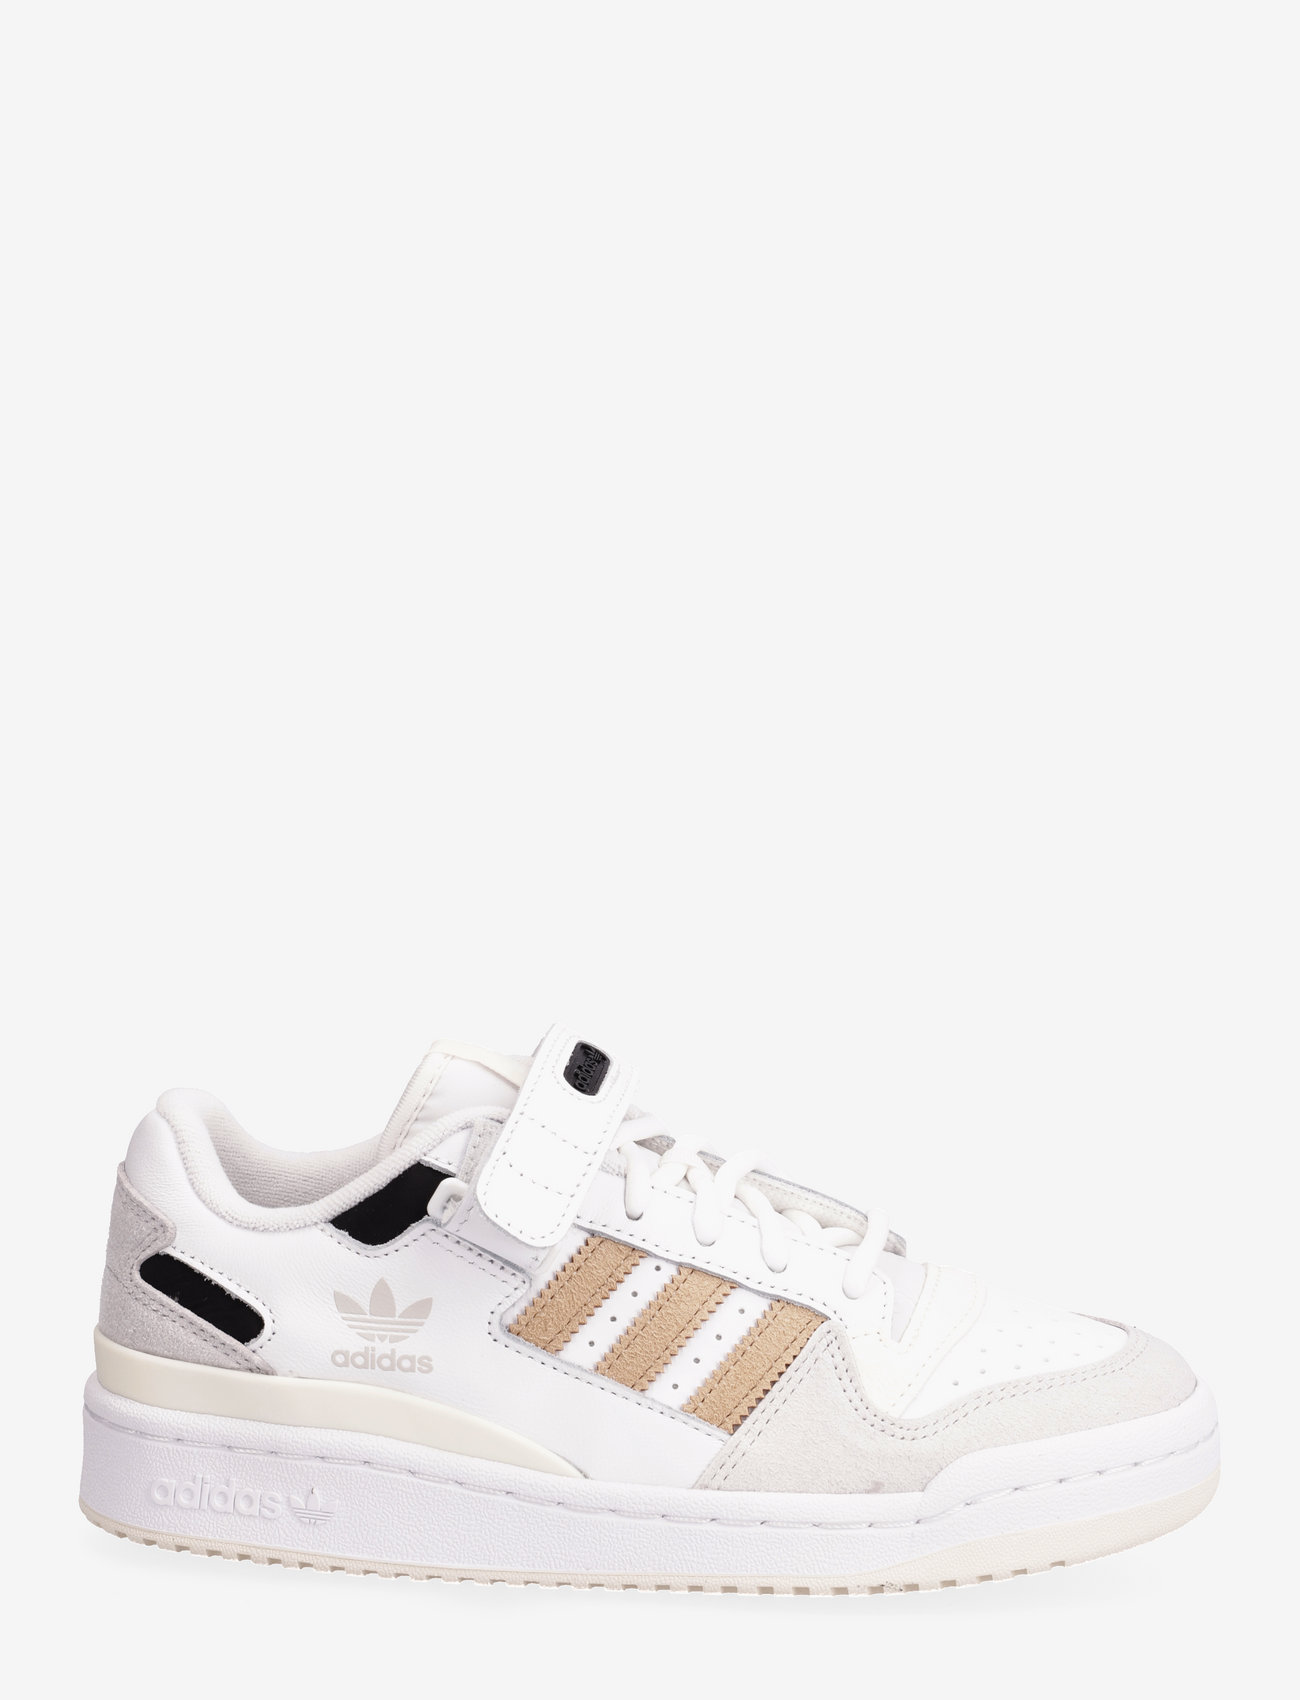 adidas Originals - Forum Low Shoes - low top sneakers - ftwwht/magbei/cblack - 1